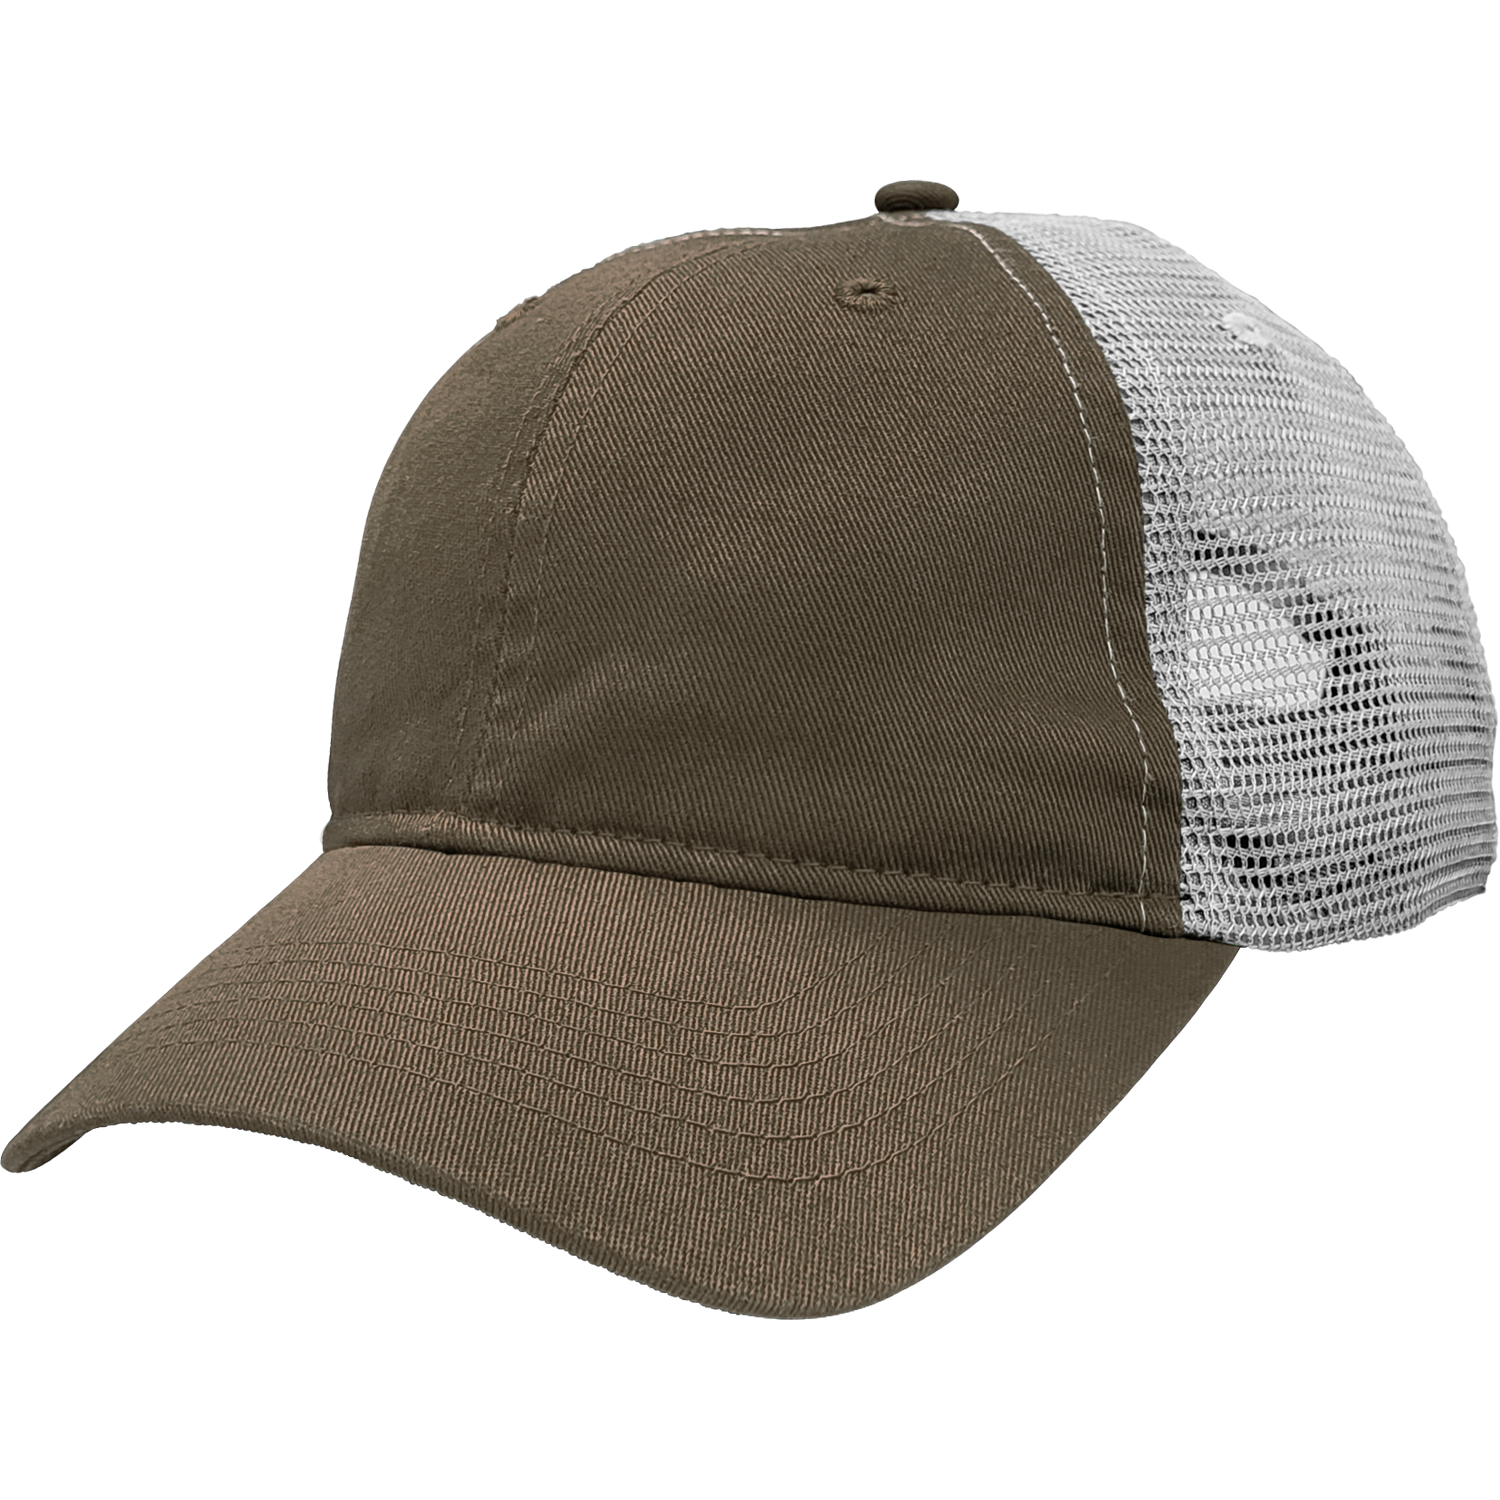 6 Panel Unstructured Mesh - WS61